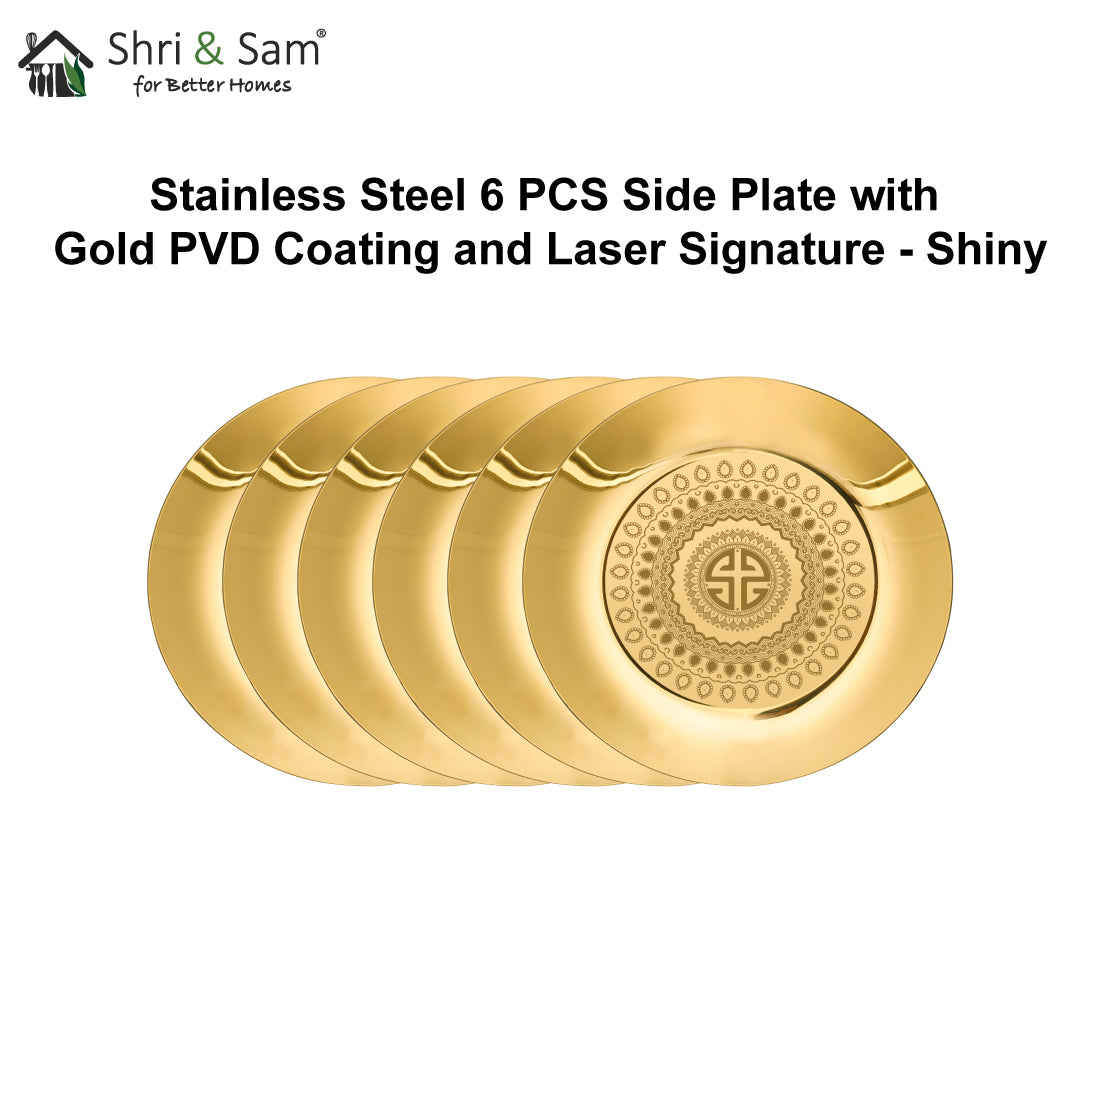 Stainless Steel 6 PCS Side Plate with Gold PVD Coating and Laser Signature - Shiny